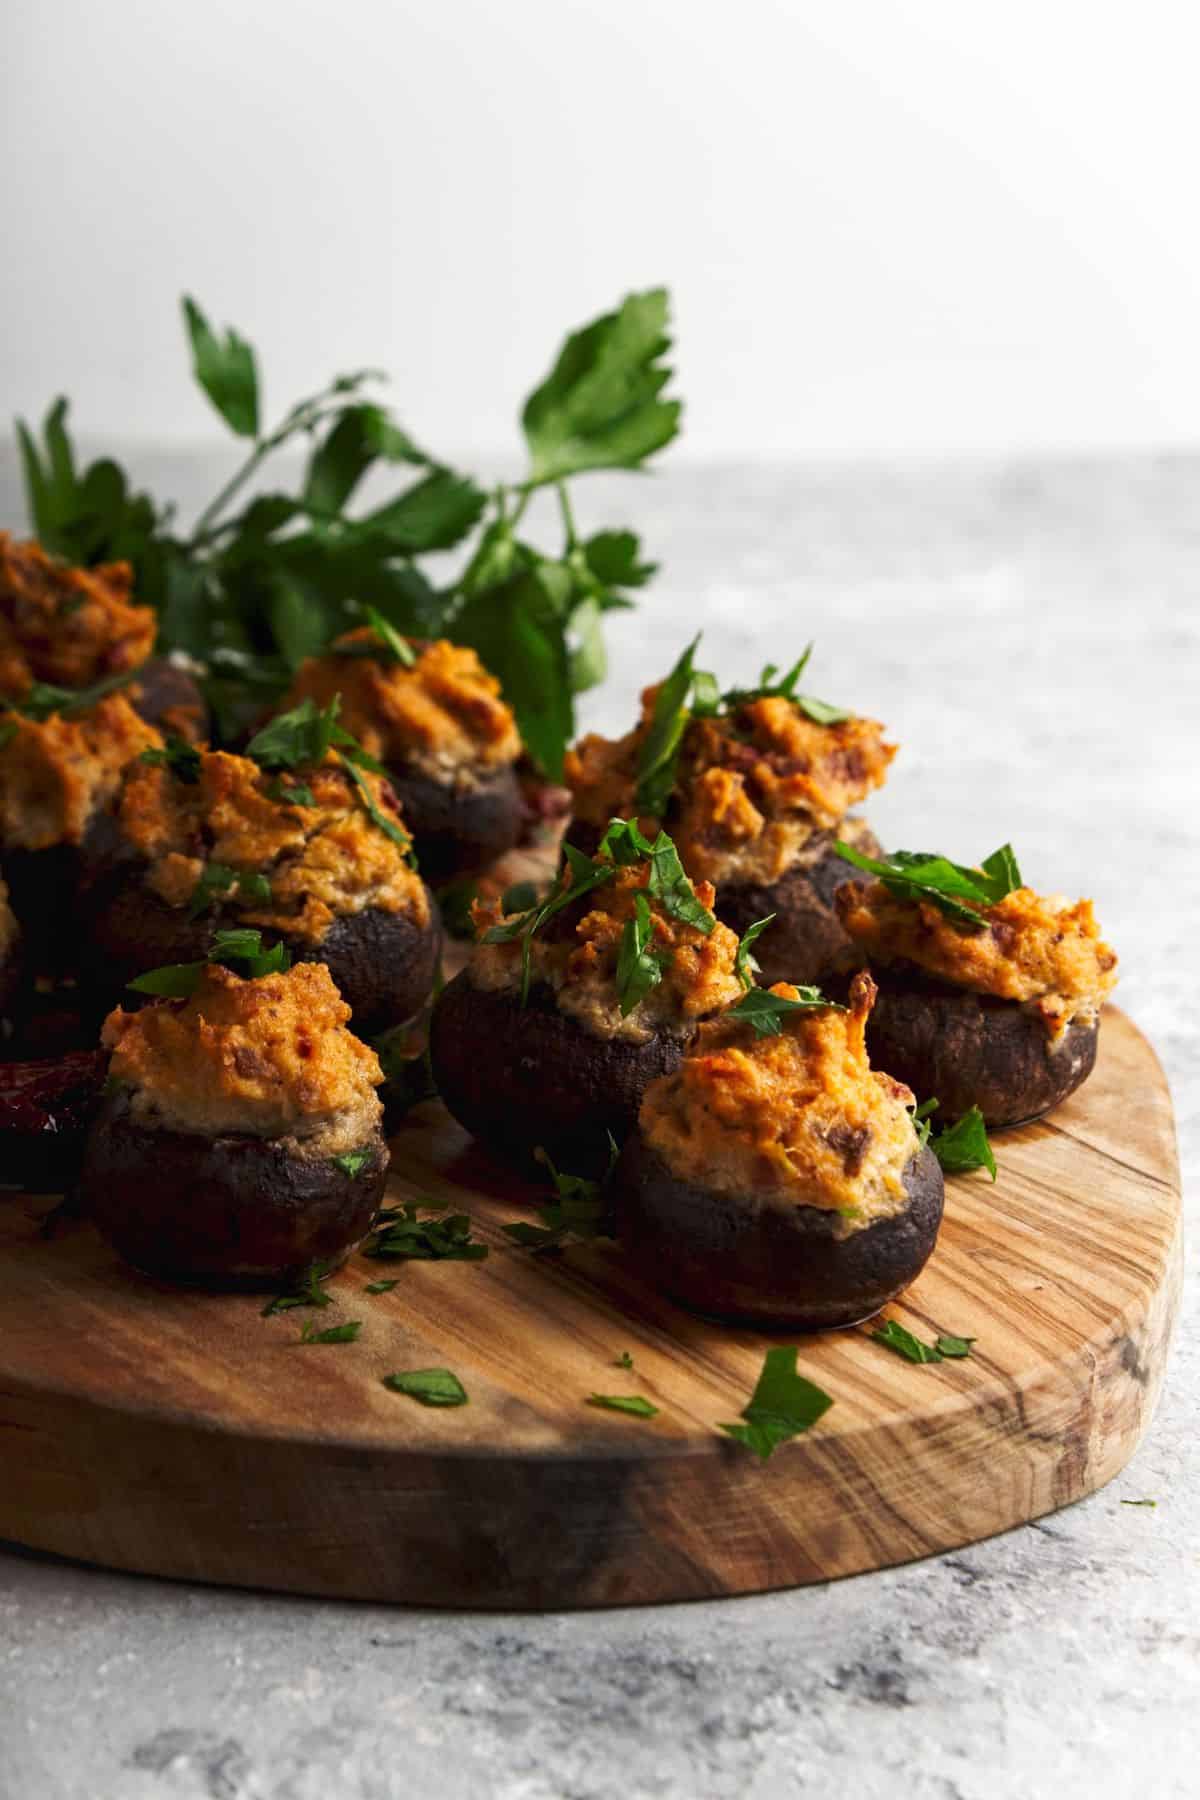 Stuffed mushrooms topped with parsley on a wood board.